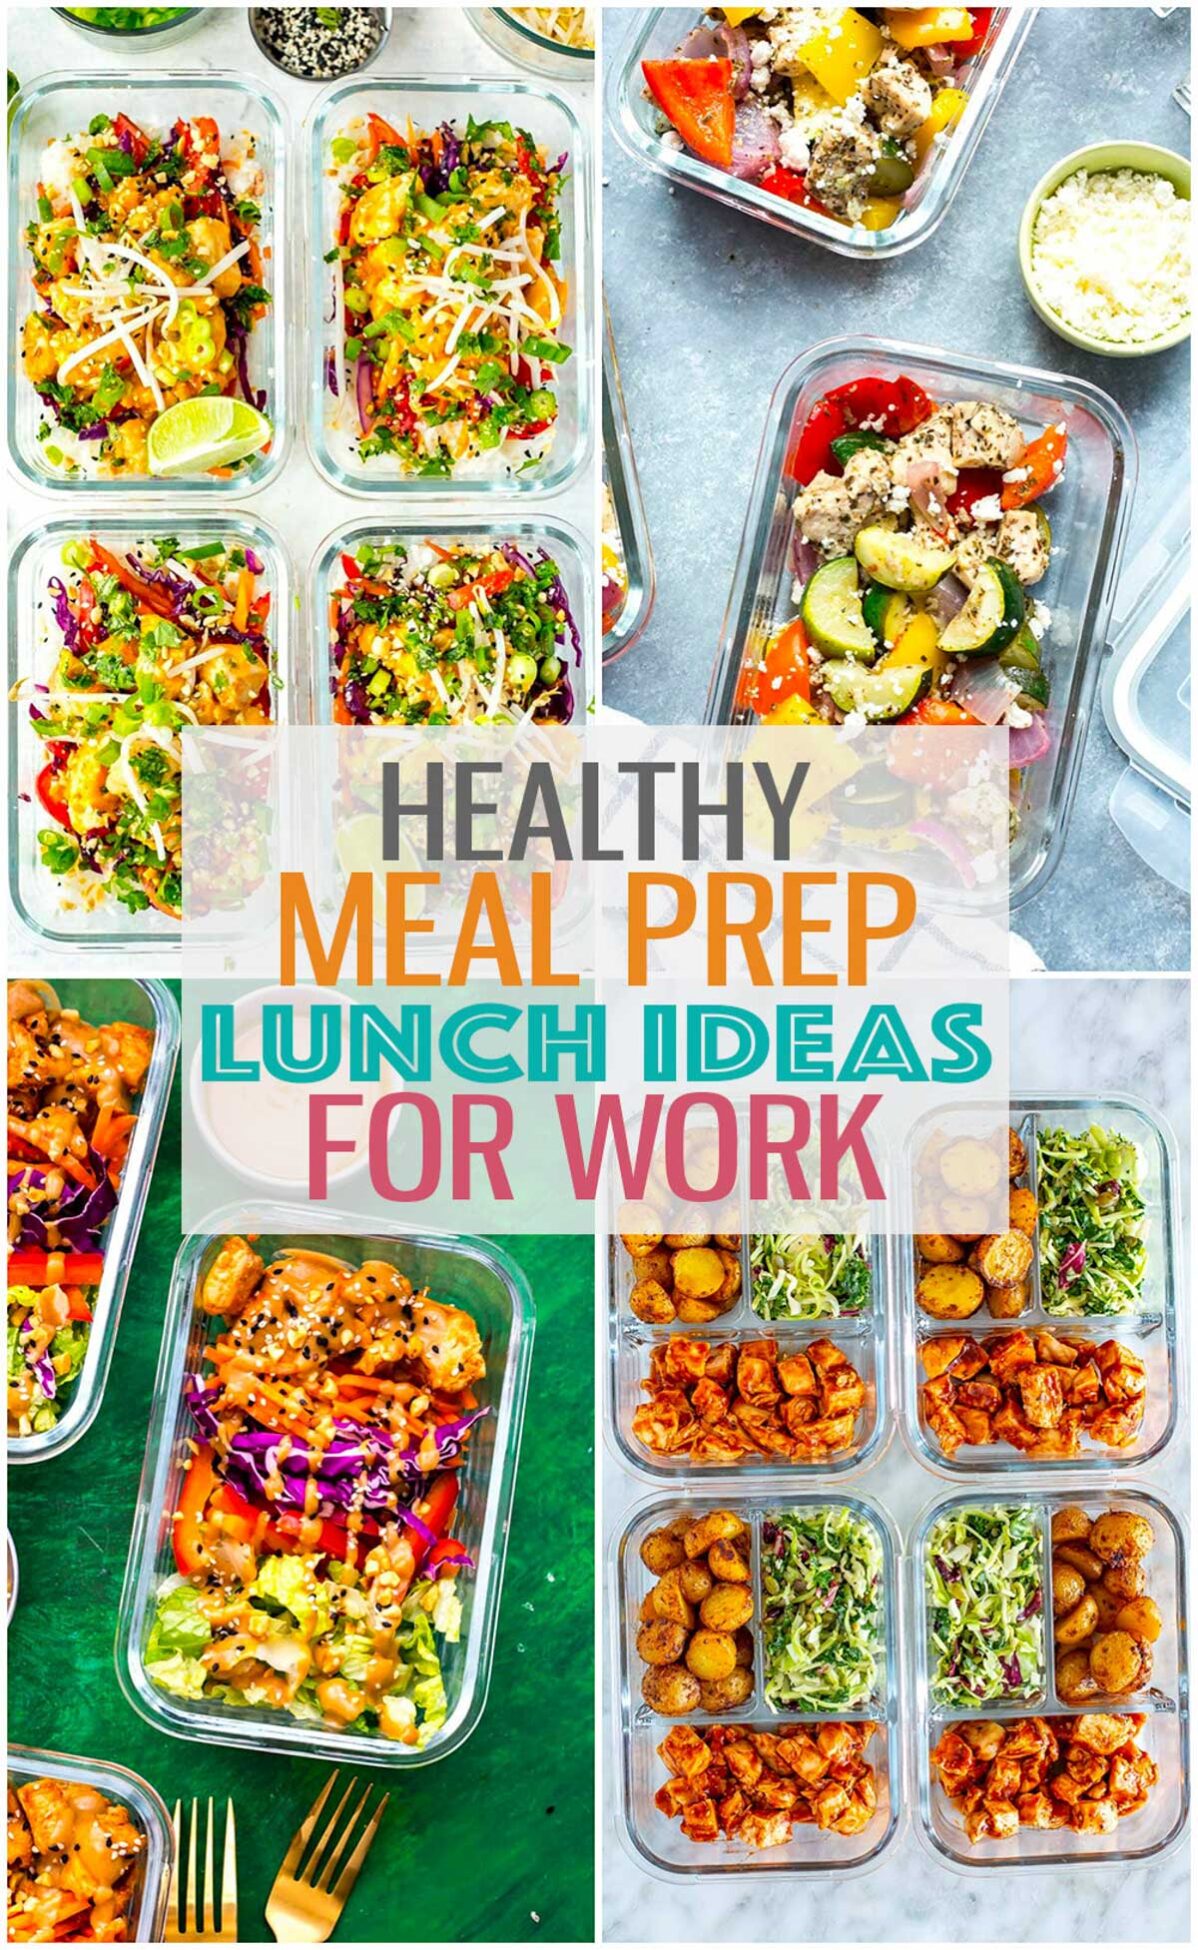 Four different lunch recipes with the text "Healthy Meal Prep Lunch Ideas for Work" layered over top.